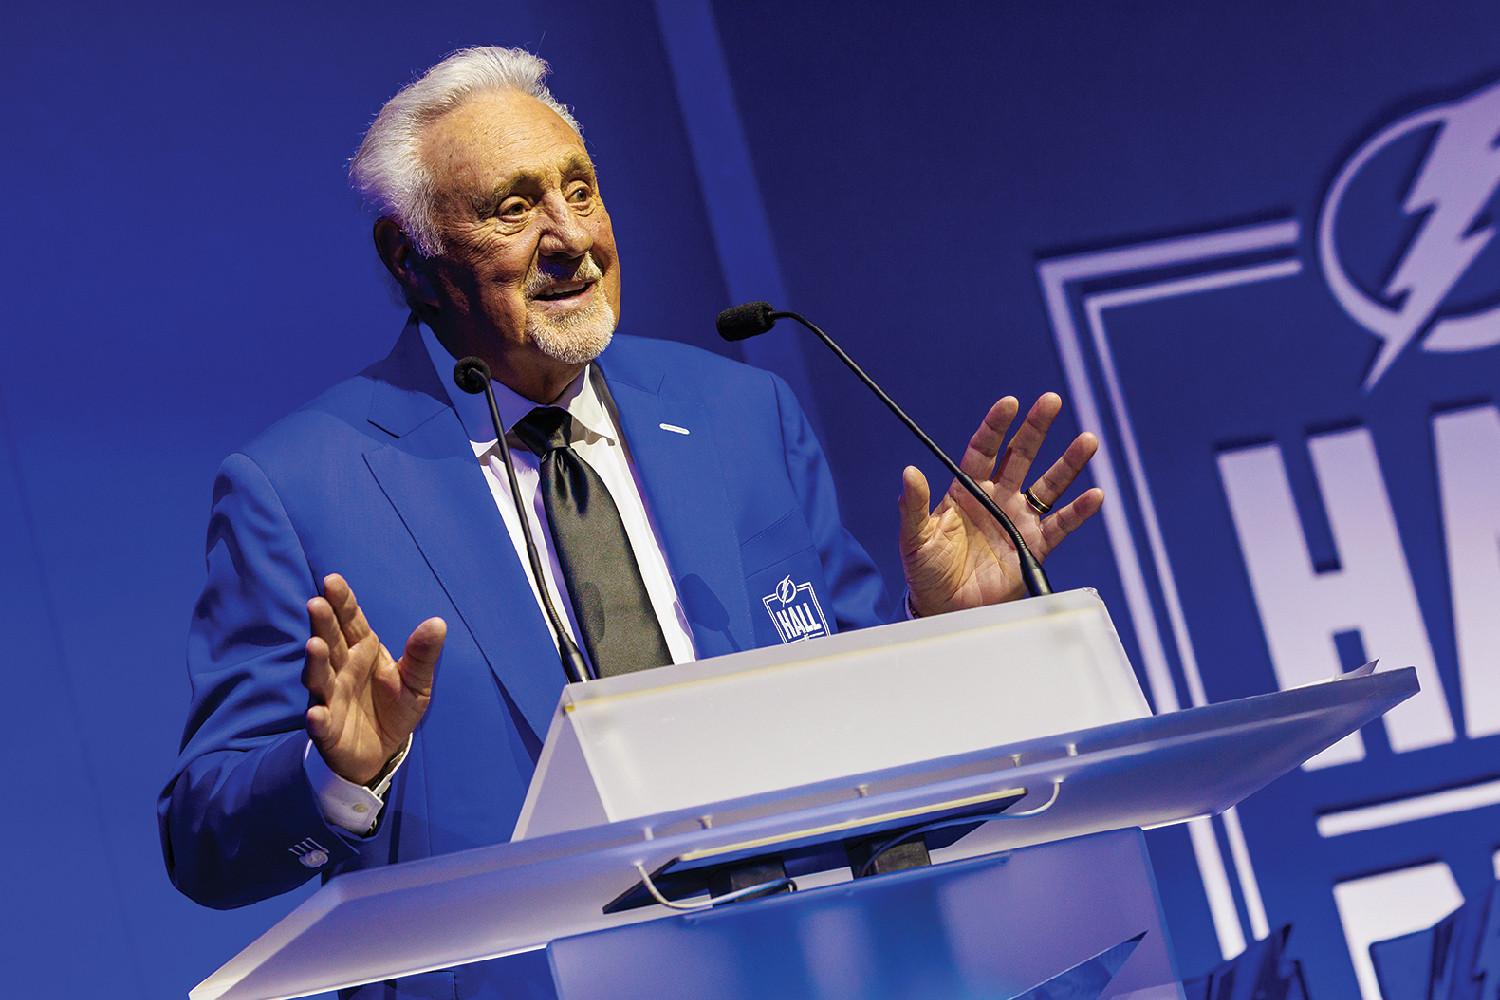 Phil Esposito to be inducted into Lightning Hall of Fame